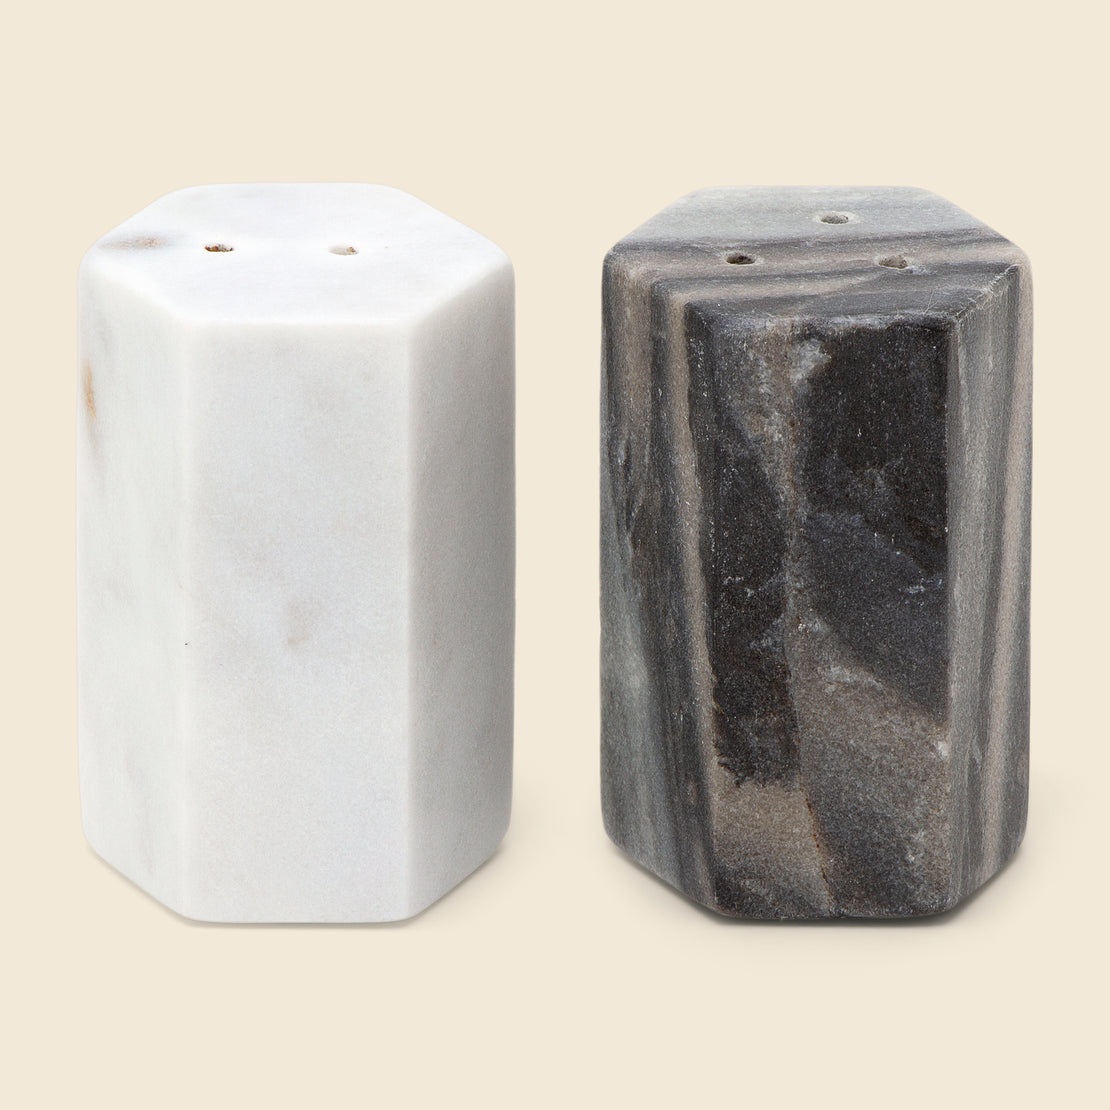 Marble Salt & Pepper Shakers - Home - STAG Provisions - Home - Kitchen - Tabletop